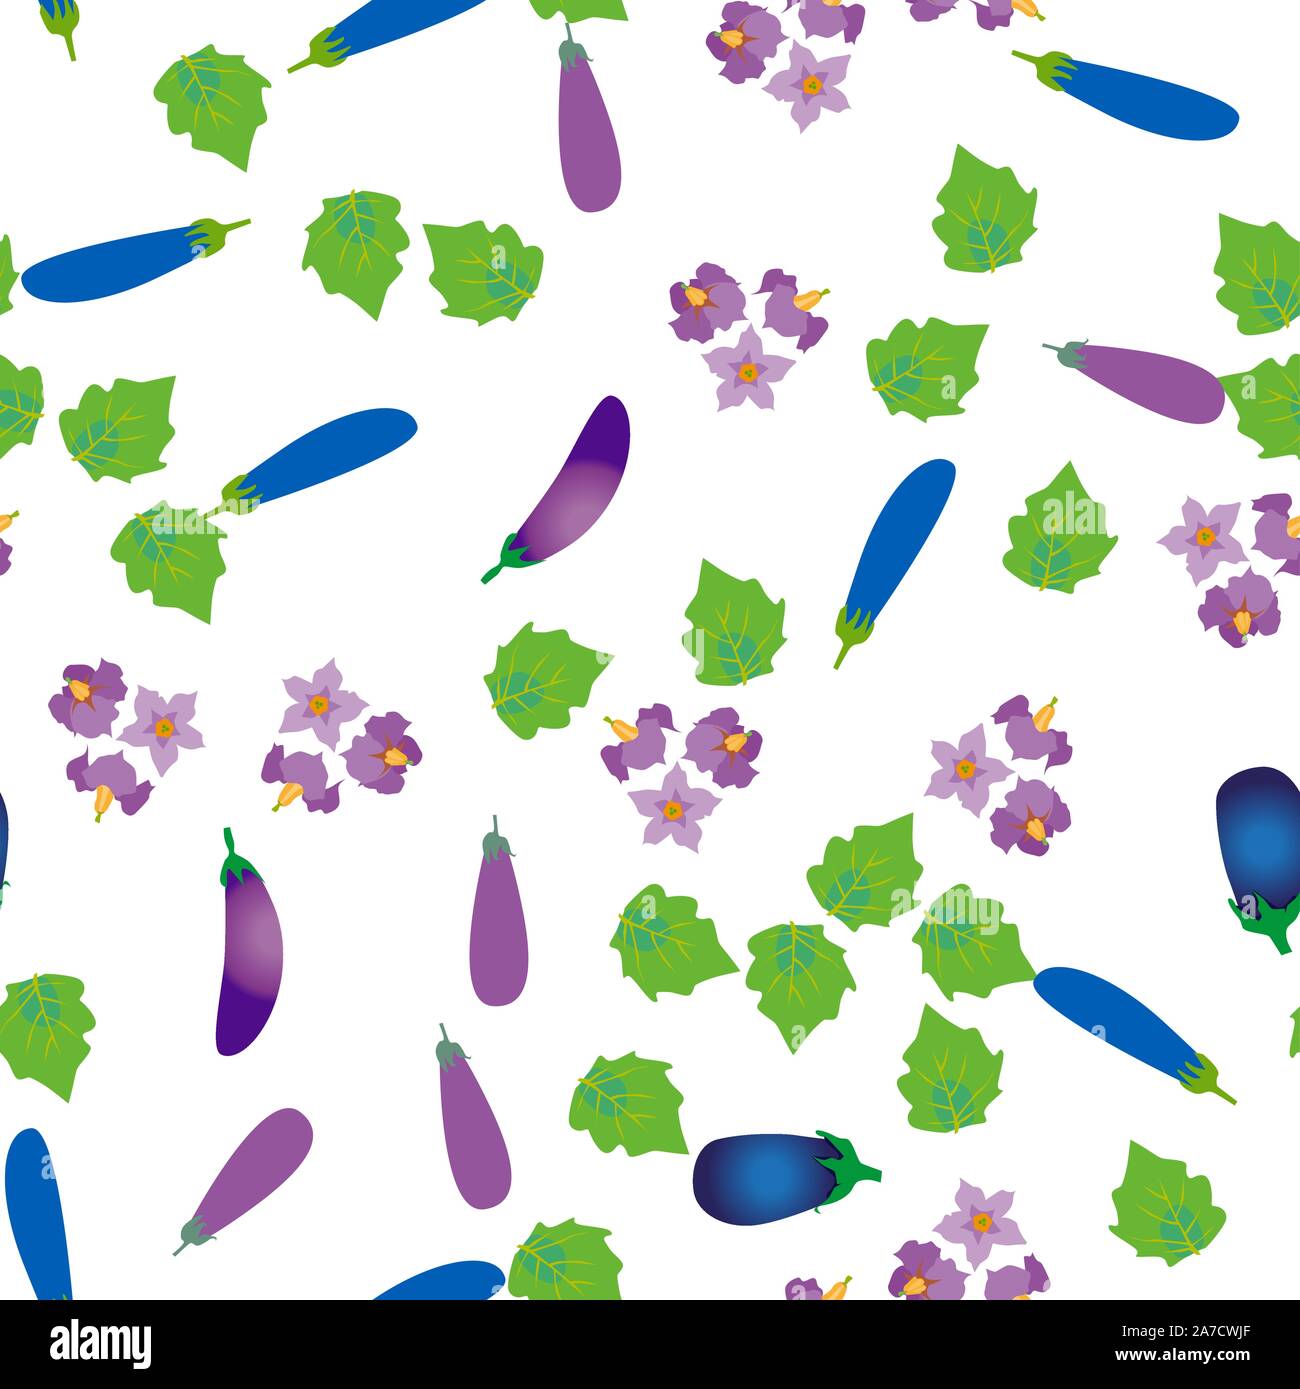 Seamless pattern vegetable eggplant with flowers and leaves Stock Vector